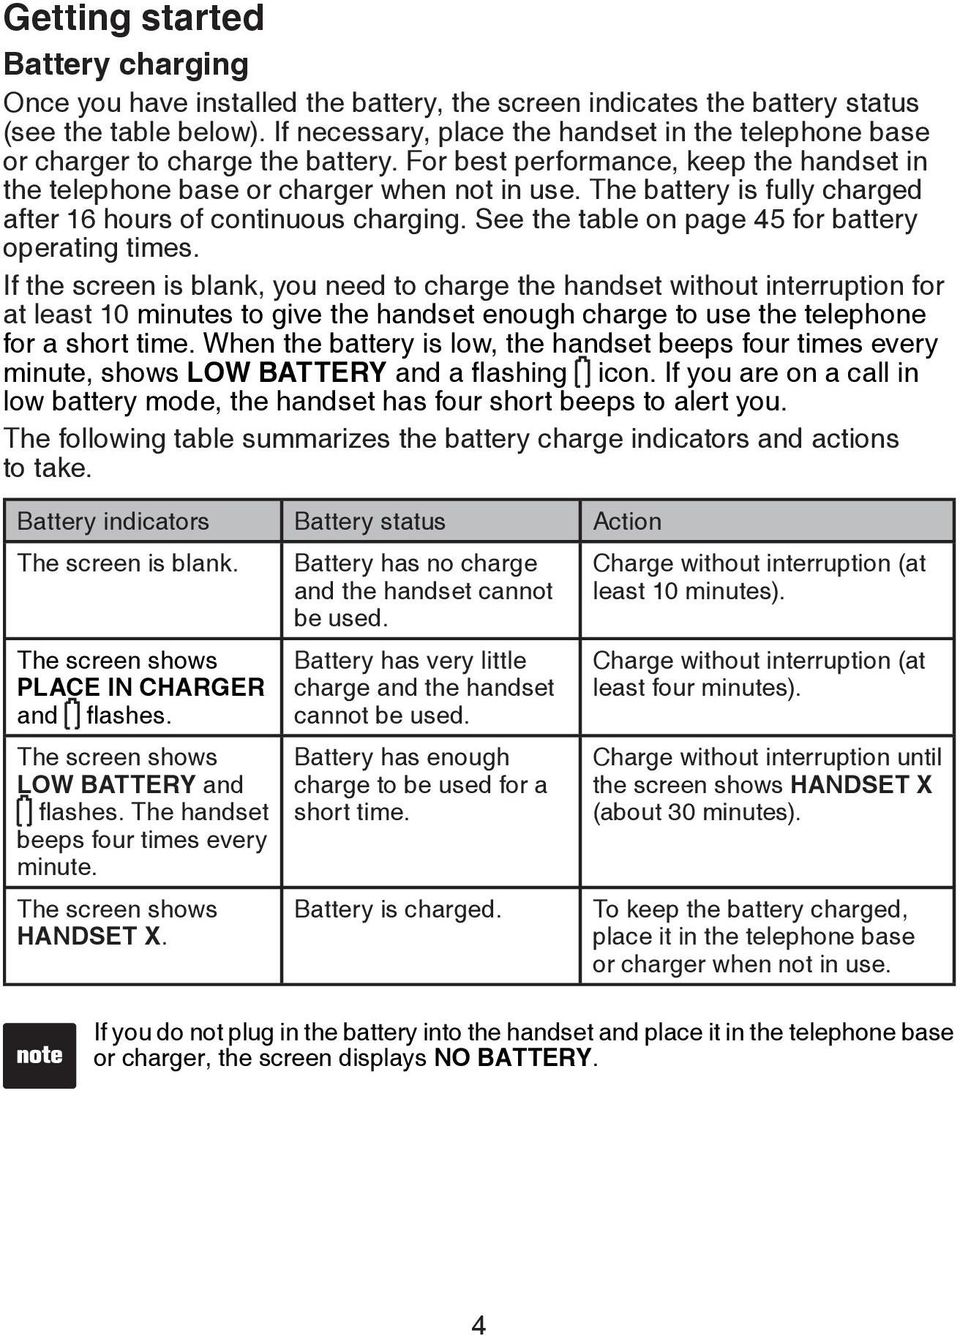 The battery is fully charged after 16 hours of continuous charging. See the table on page 45 for battery operating times.